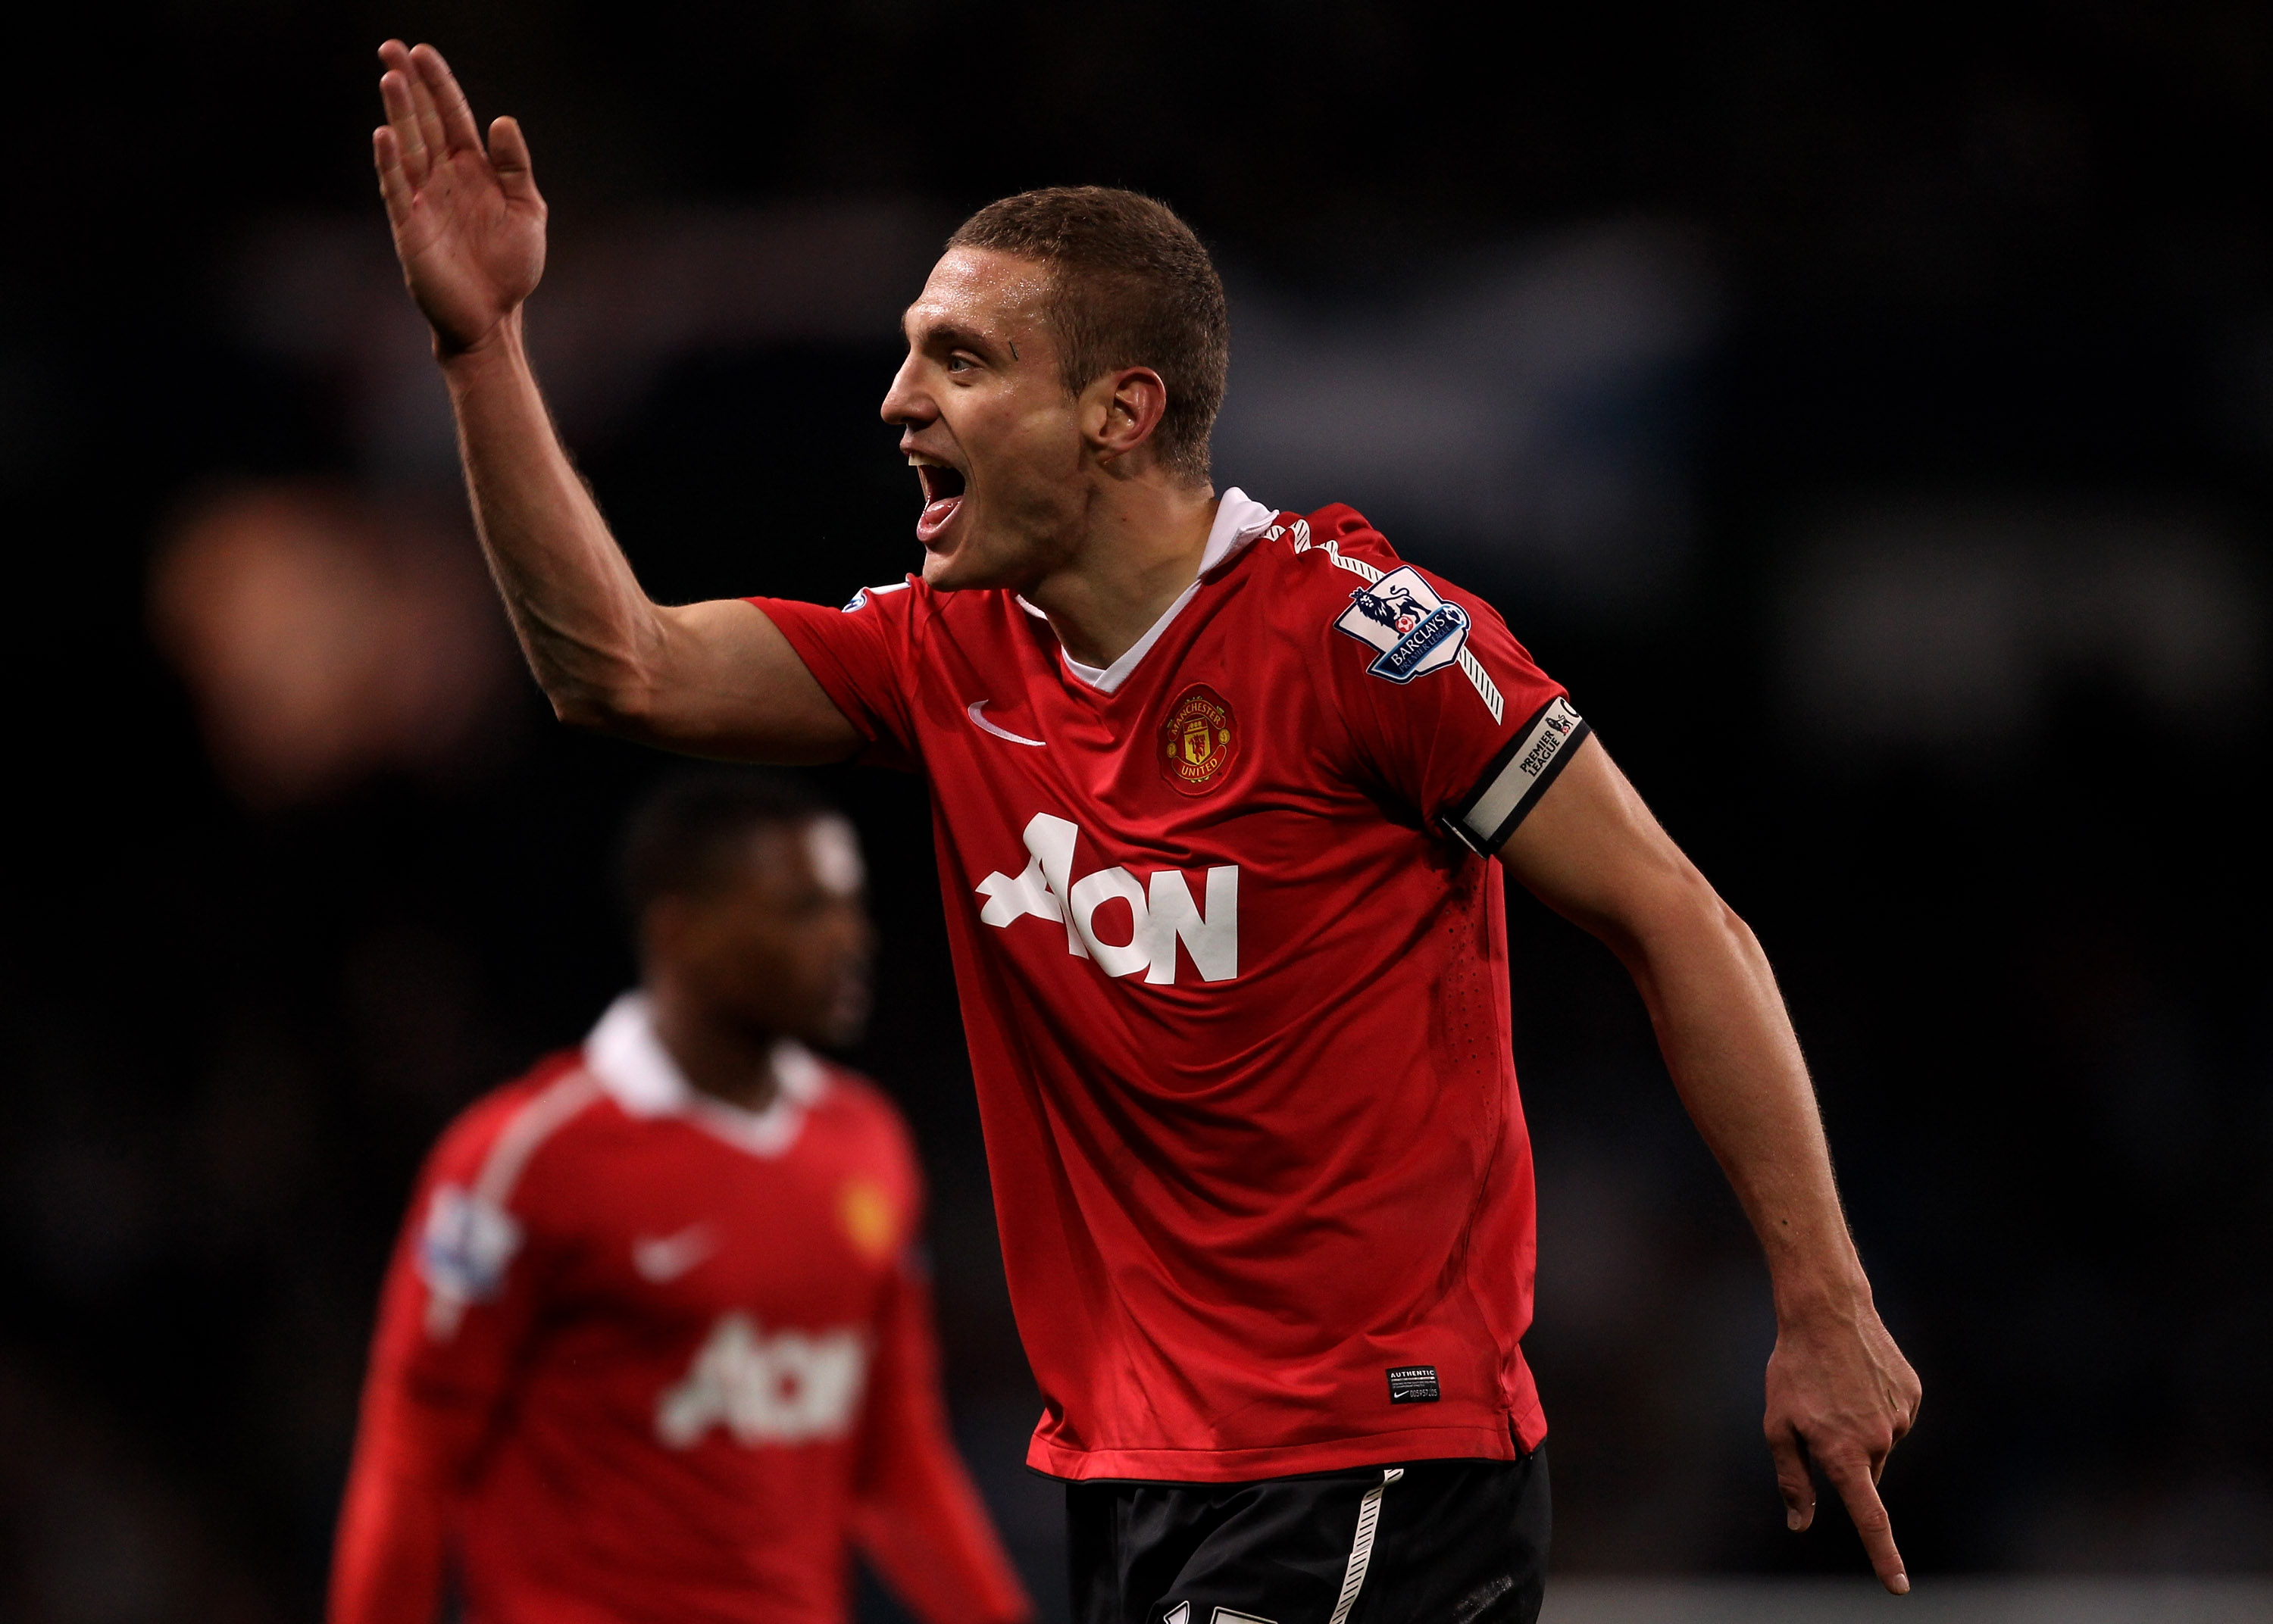 MANCHESTER, UNITED KINGDOM - NOVEMBER 10:   Nemanja Vidic of Manchester United reacts during the Barclays Premier League match between Manchester City and Manchester United at the City of Manchester Stadium on November 10, 2010 in Manchester, England. (Ph